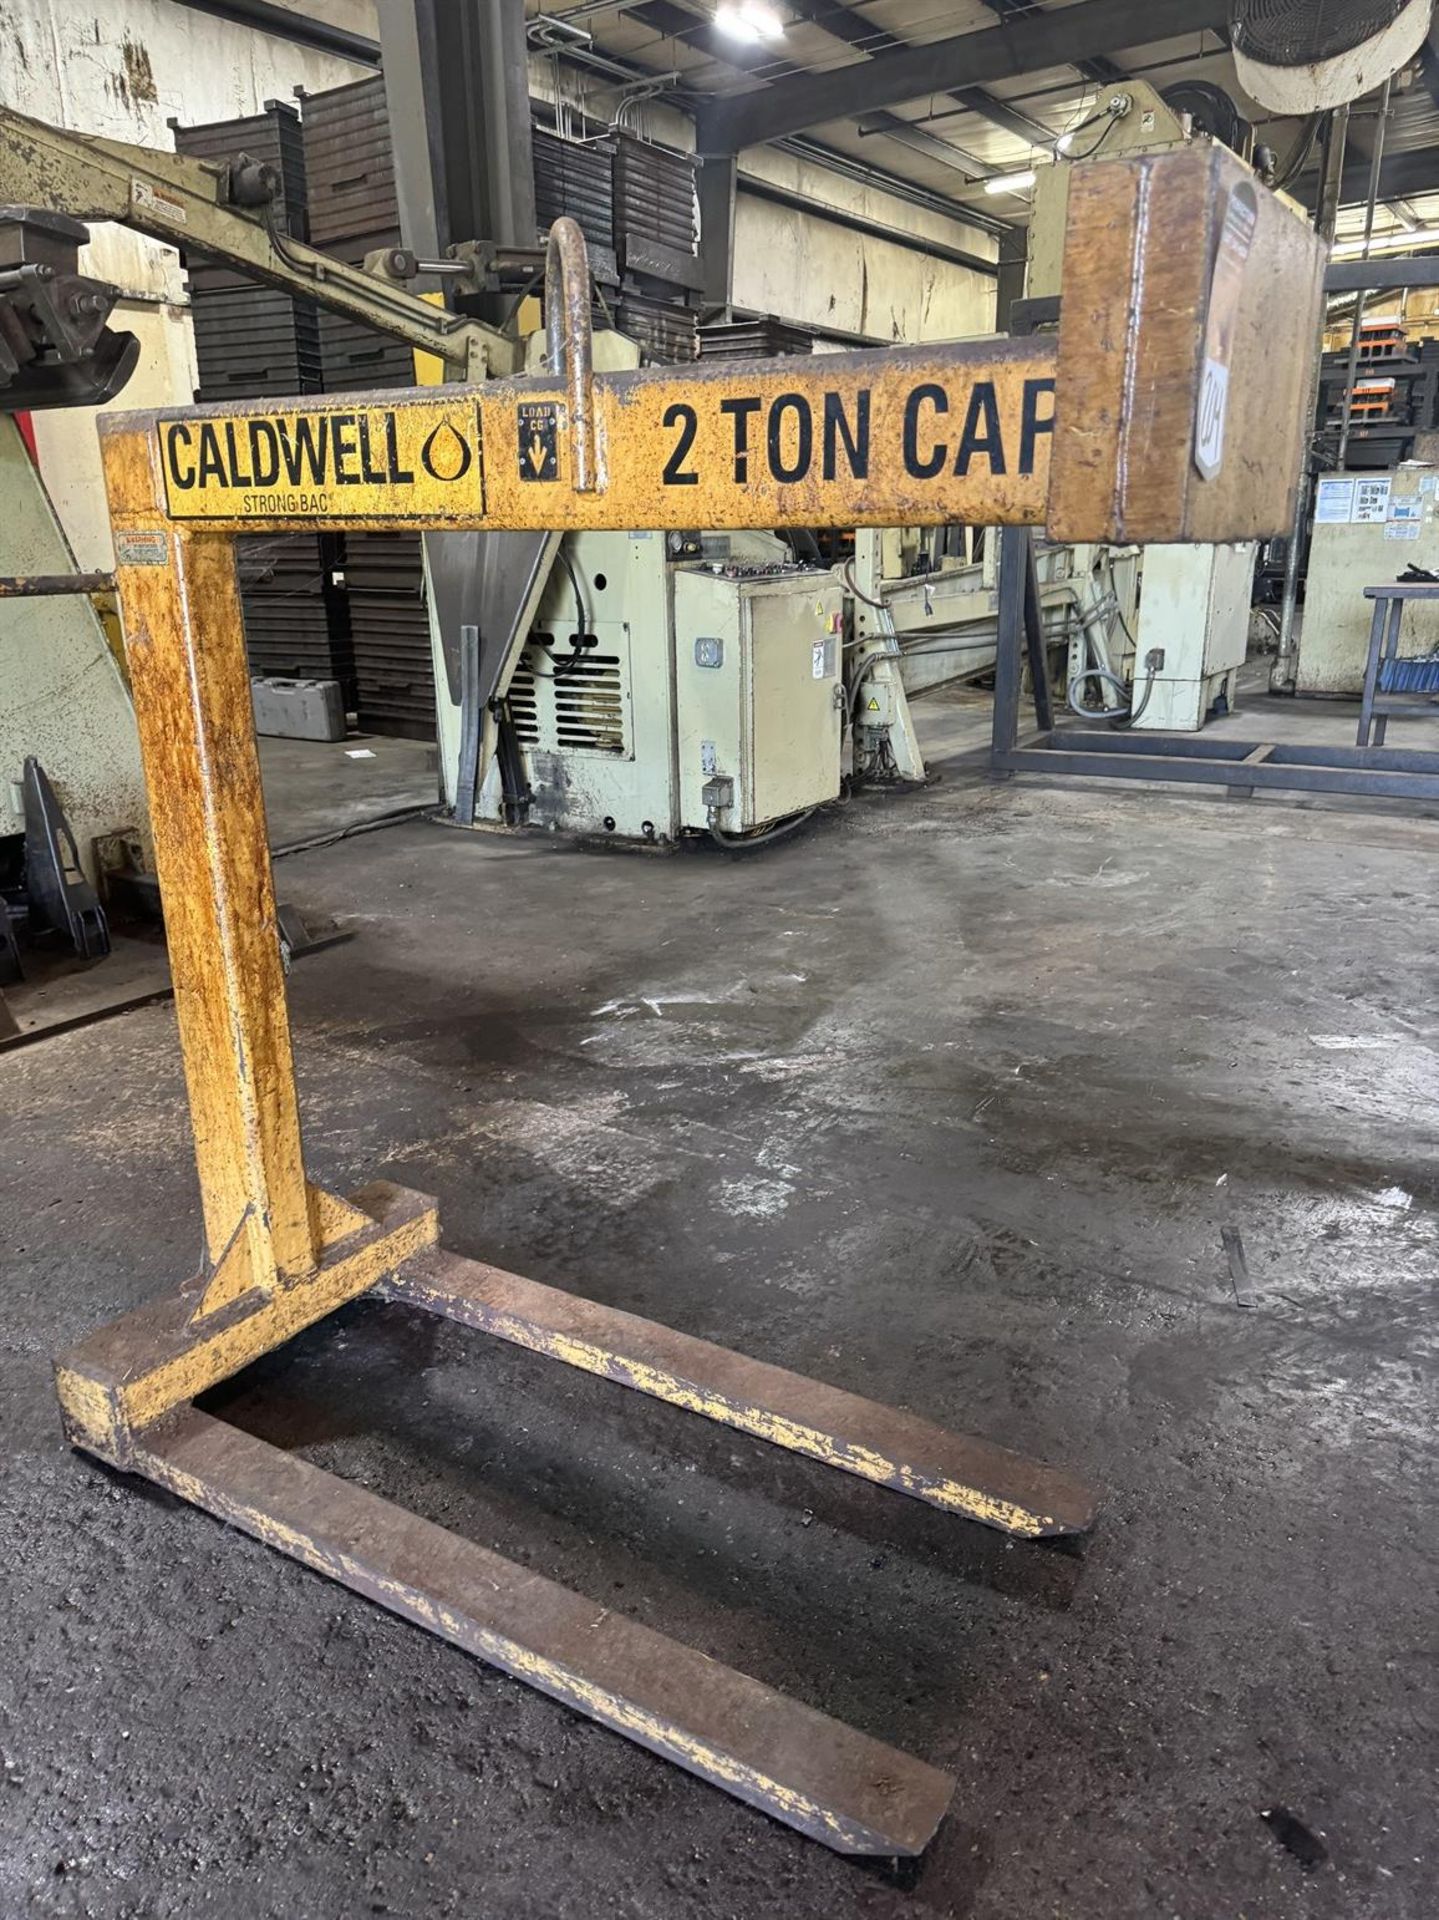 CALDWELL 90-2-48 Fixed Forks Pallet Lifter, s/n 03-44469-2, 2-Ton Capacity